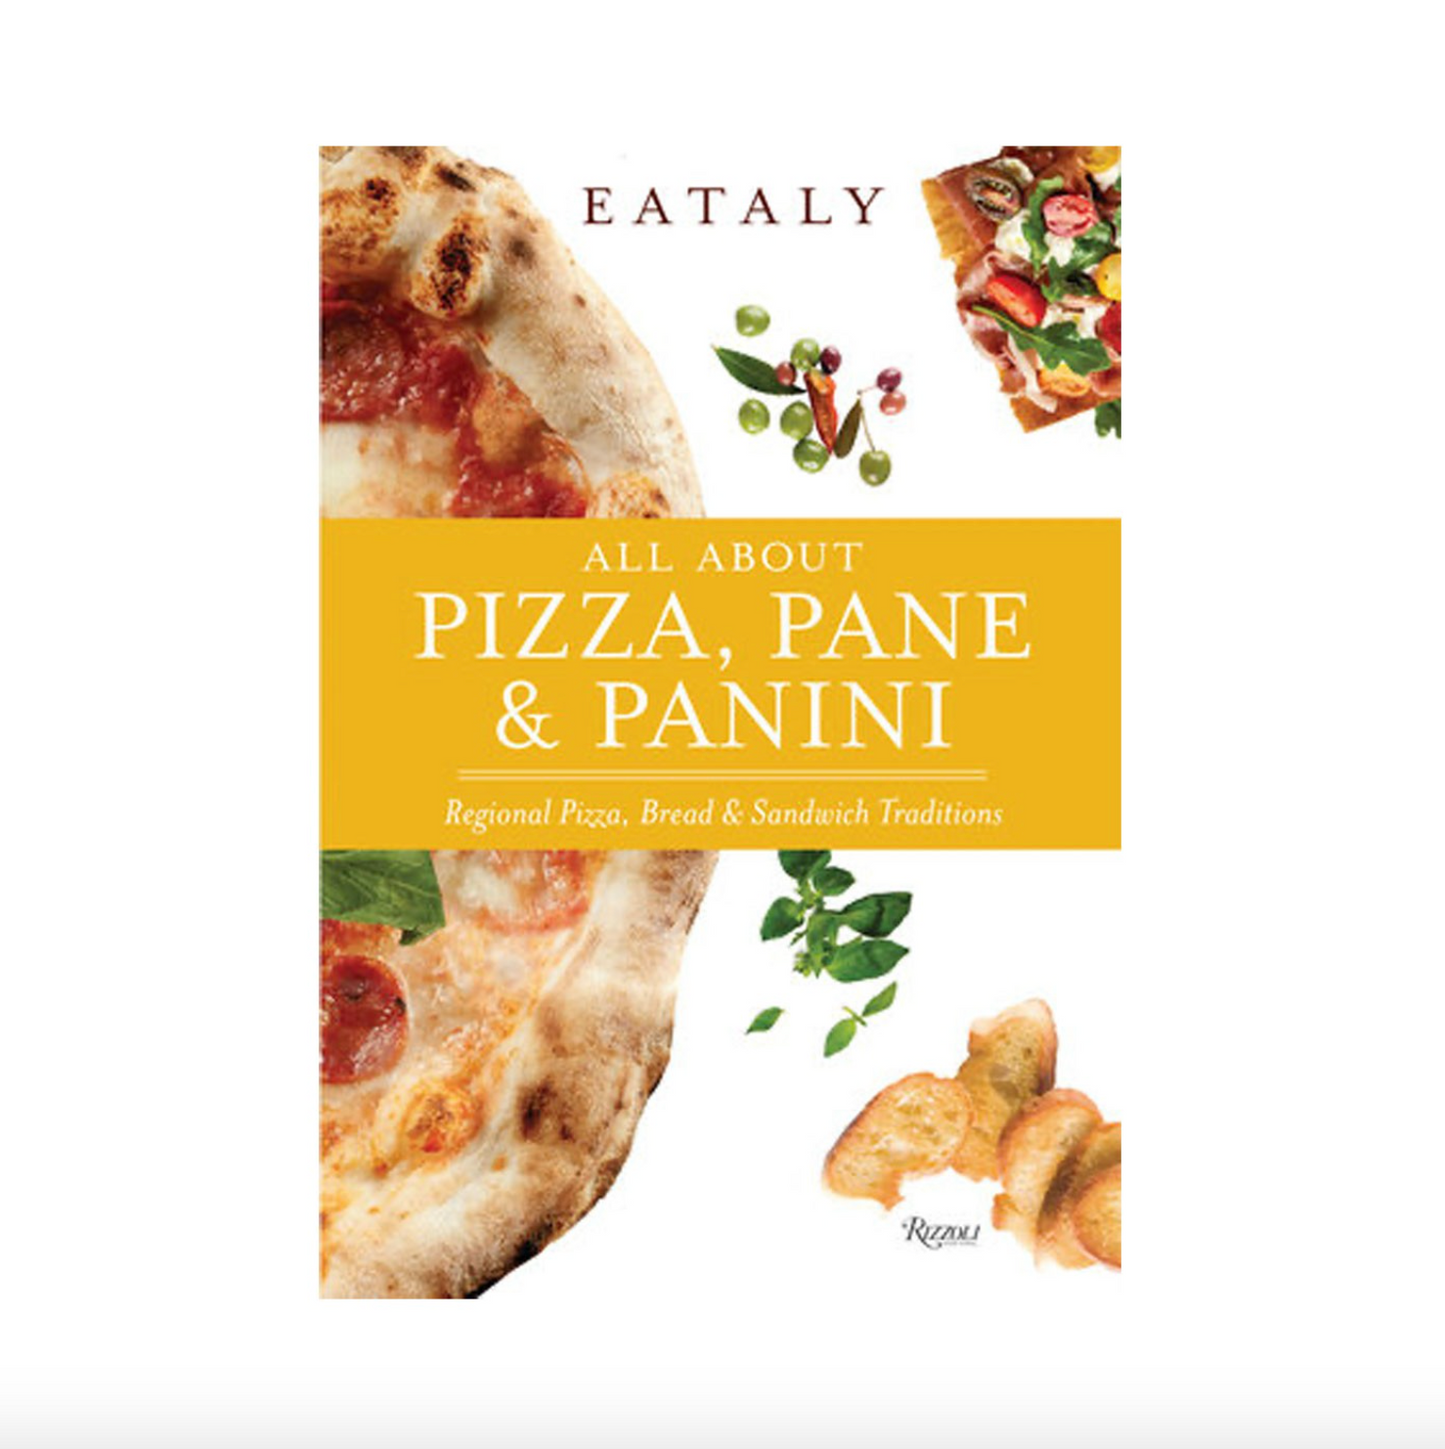 Eataly Pizza Pane Panini Cookbook Cookbook in Default Title at Wrapsody